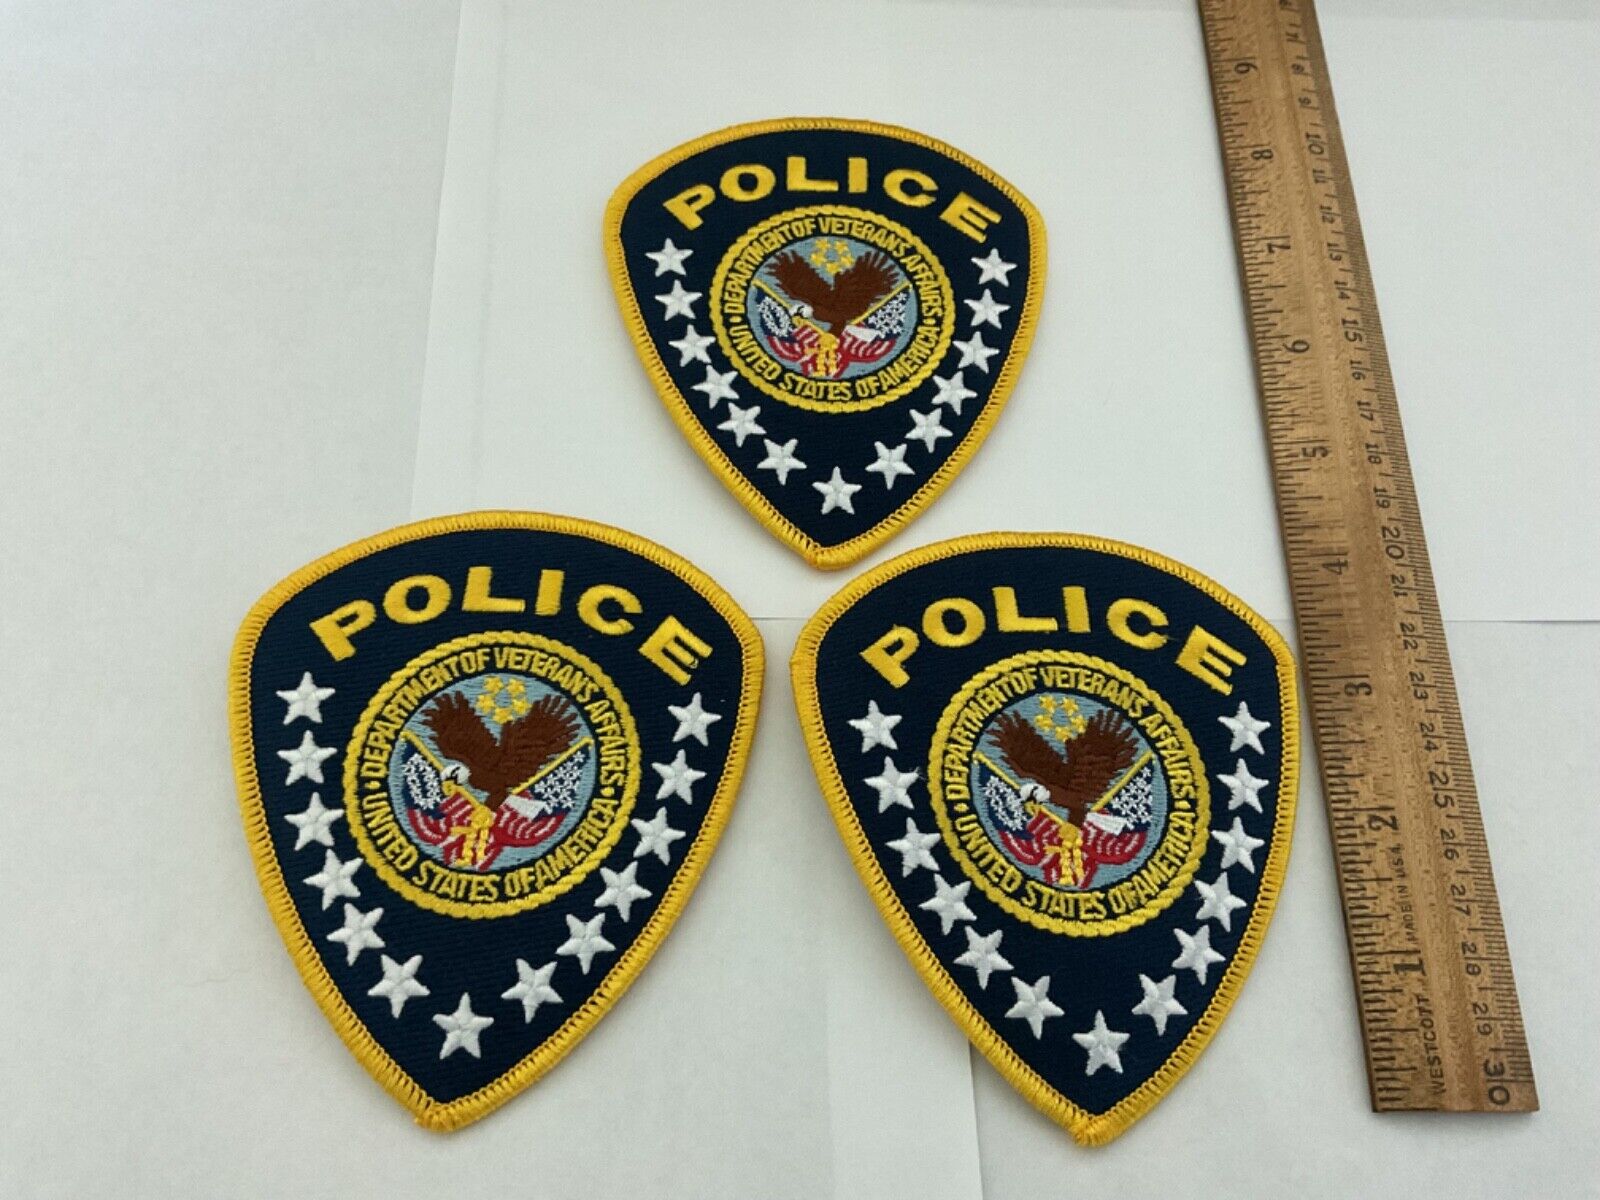 Police Department Of Veterans Affairs full size collectible patches 3 pieces